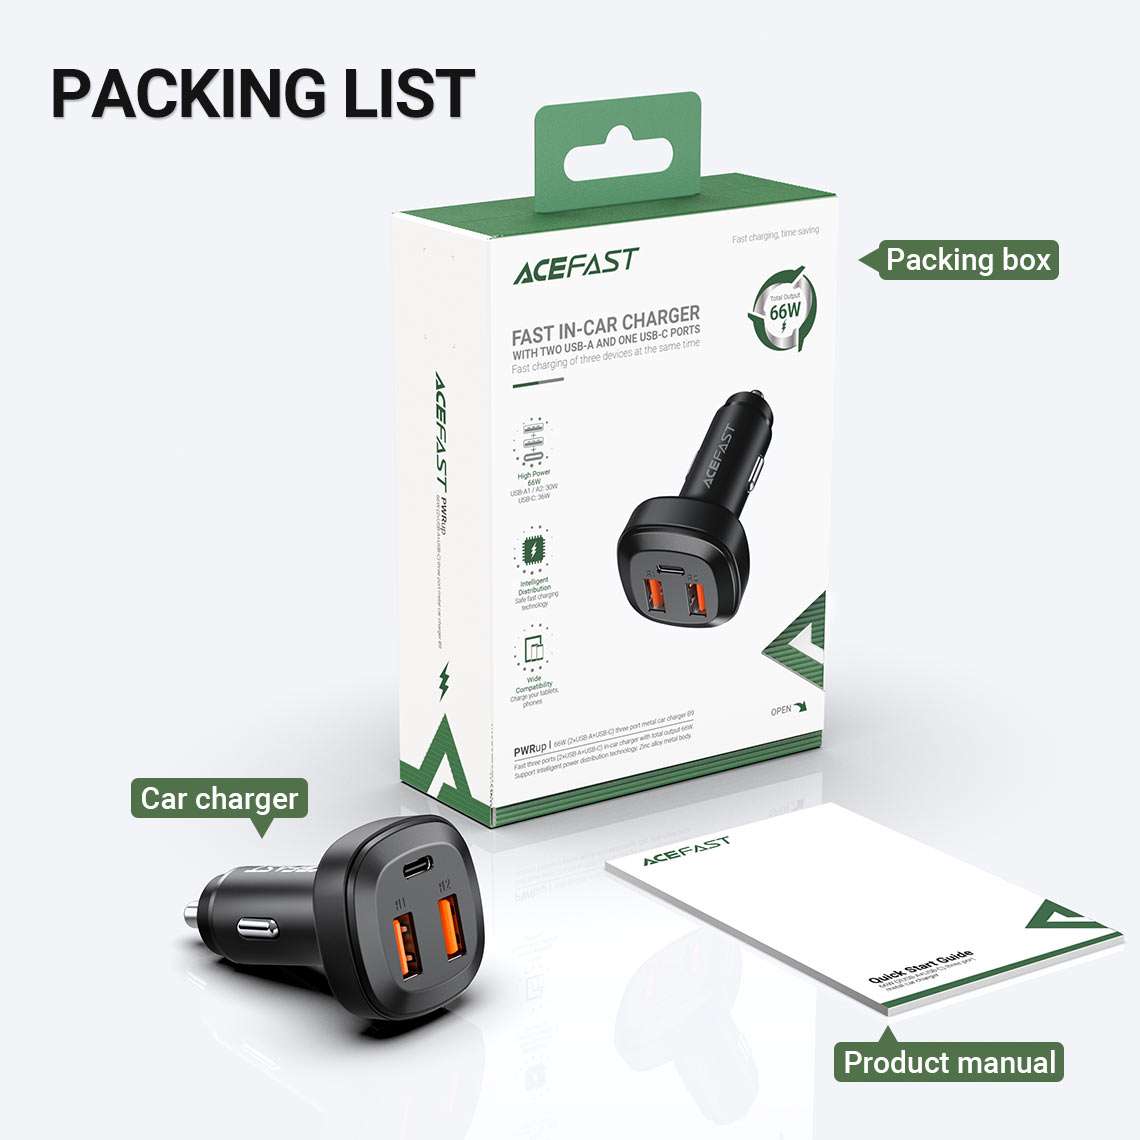 acefast b9 66w car charger packaging